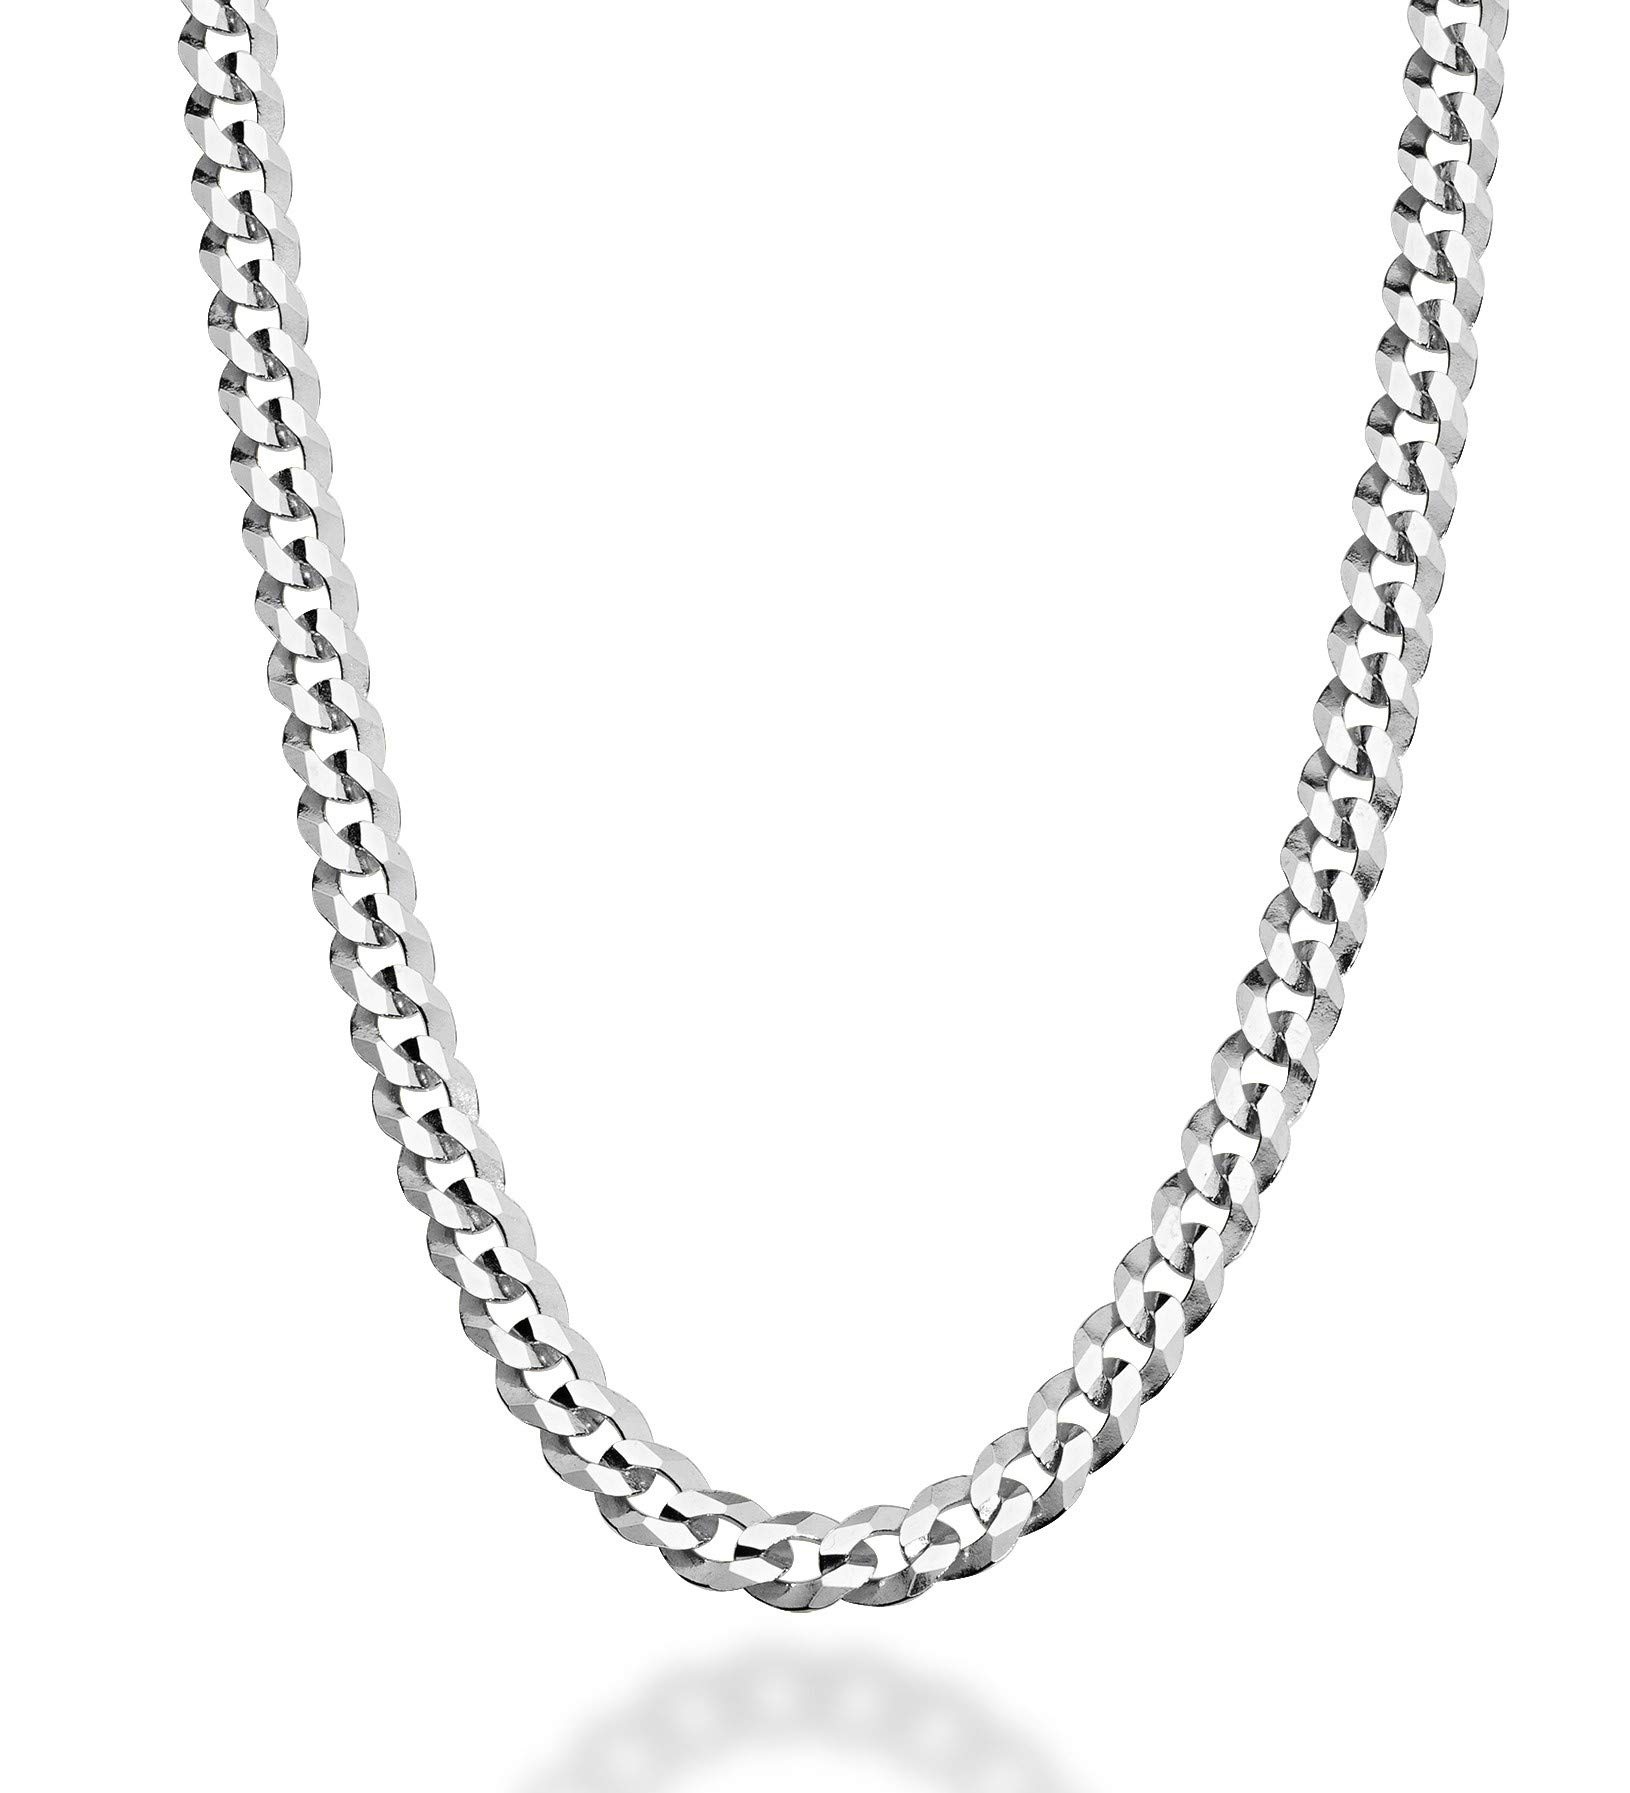 Miabella Solid 925 Sterling Silver Italian 5mm Diamond Cut Cuban Link Curb Chain Necklace for Women Men, Made in Italy